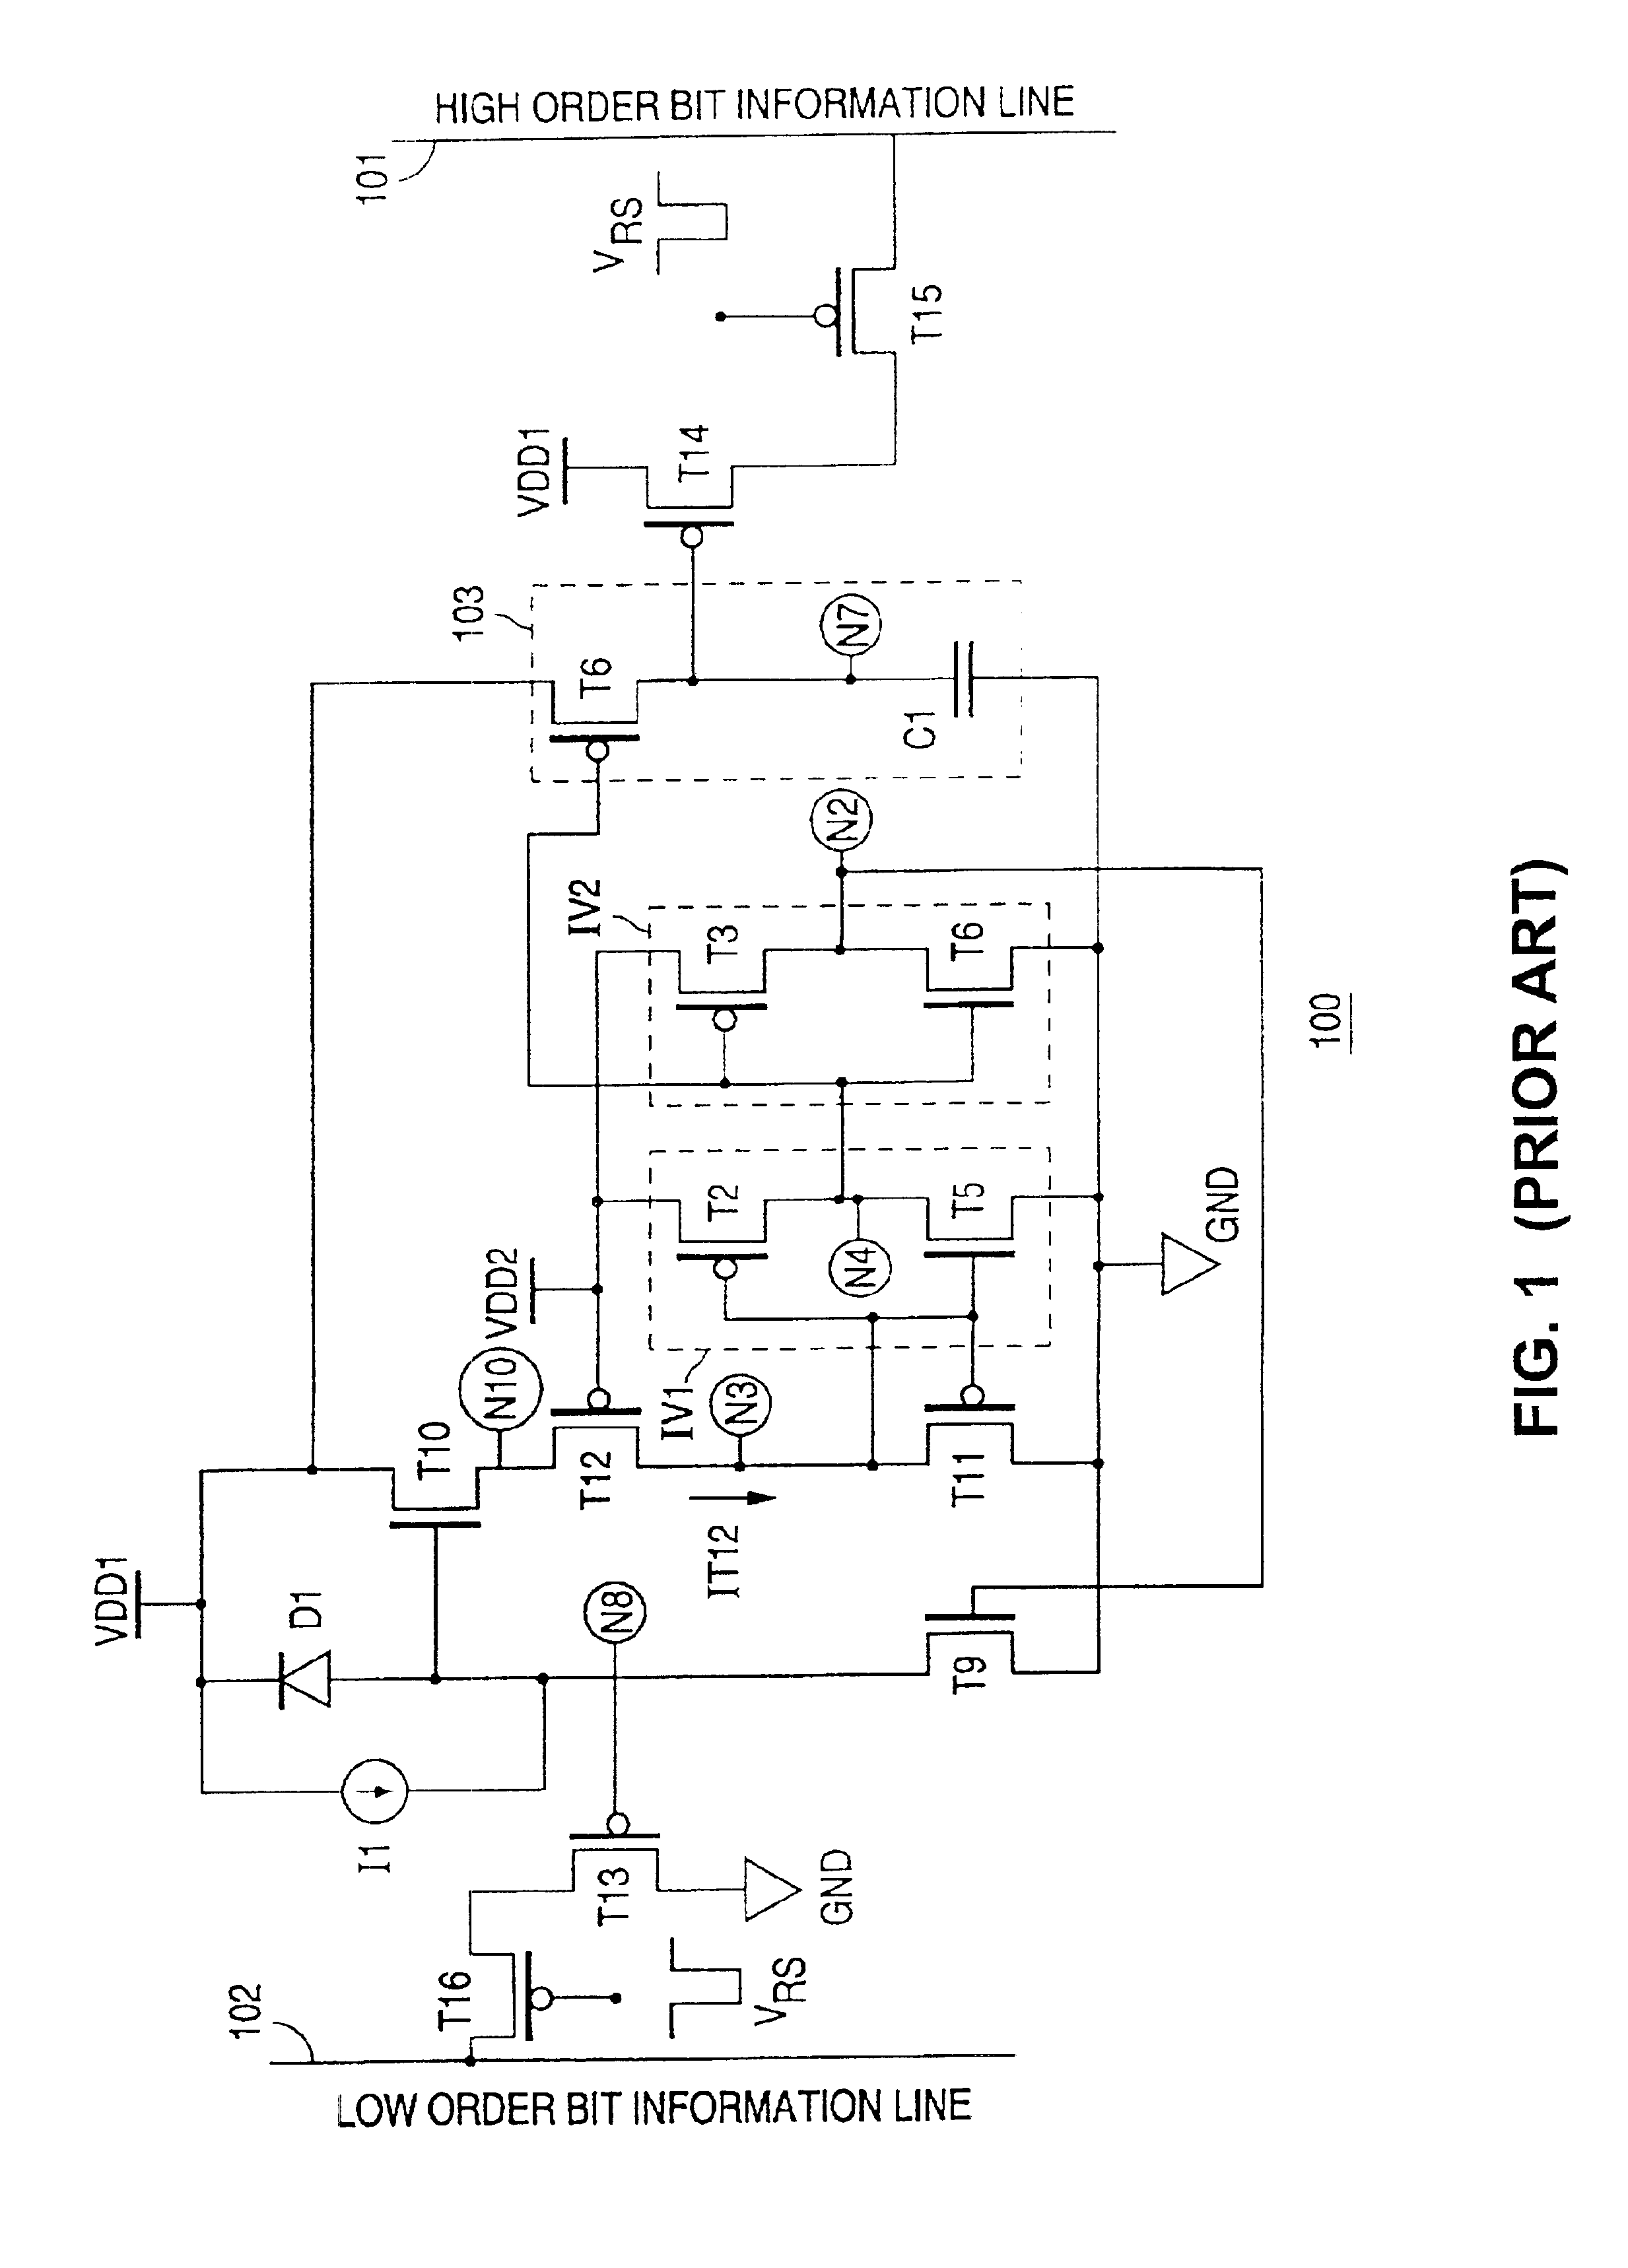 Method for improving SNR in low illumination conditions in a CMOS video sensor system using a self-resetting digital pixel